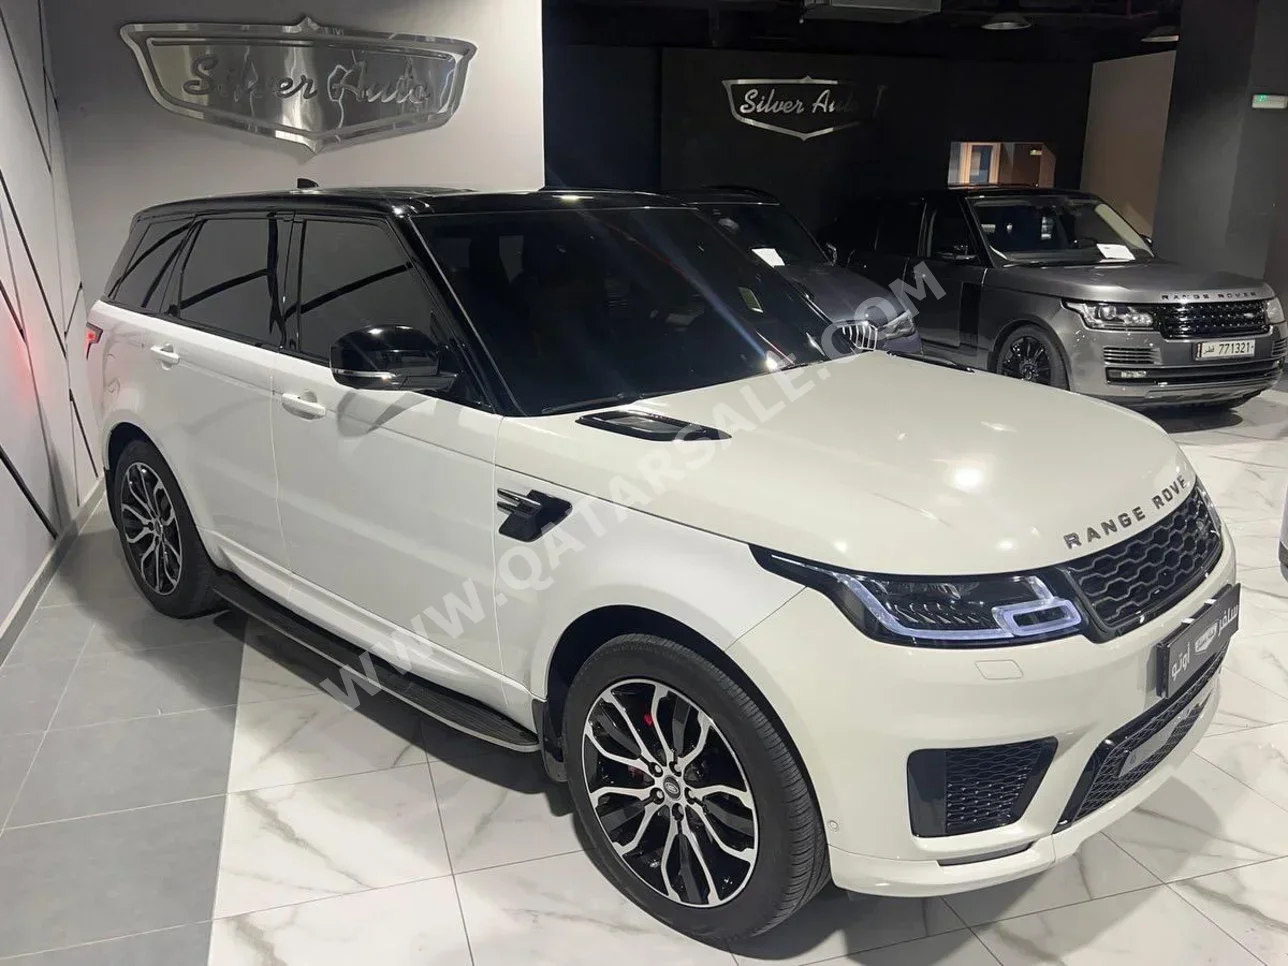 Land Rover  Range Rover  Sport Super charged  2021  Automatic  36,000 Km  8 Cylinder  Four Wheel Drive (4WD)  SUV  White  With Warranty